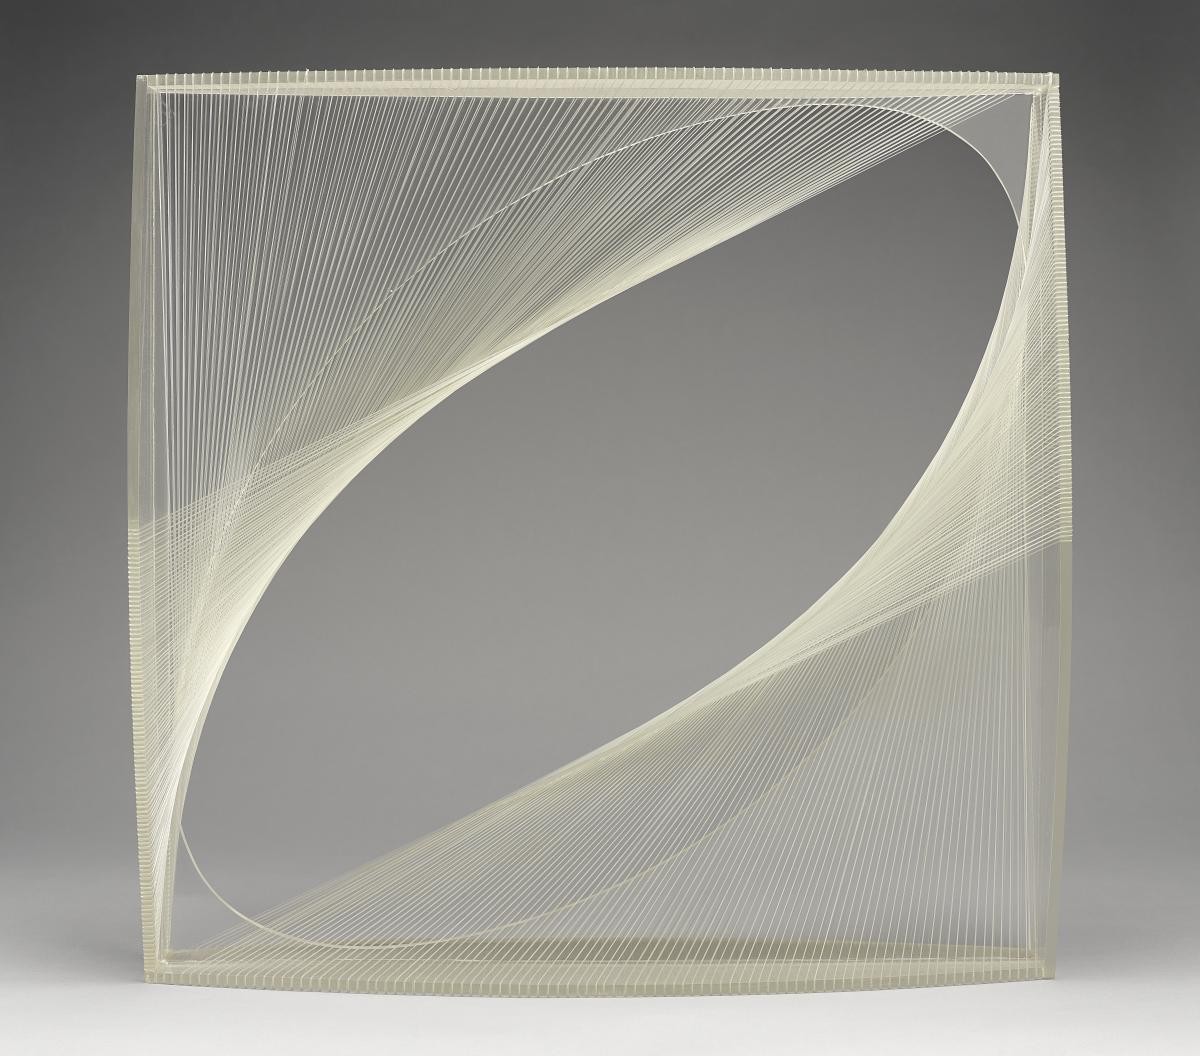 Naum Gabo. Linear Construction in Space No. 1